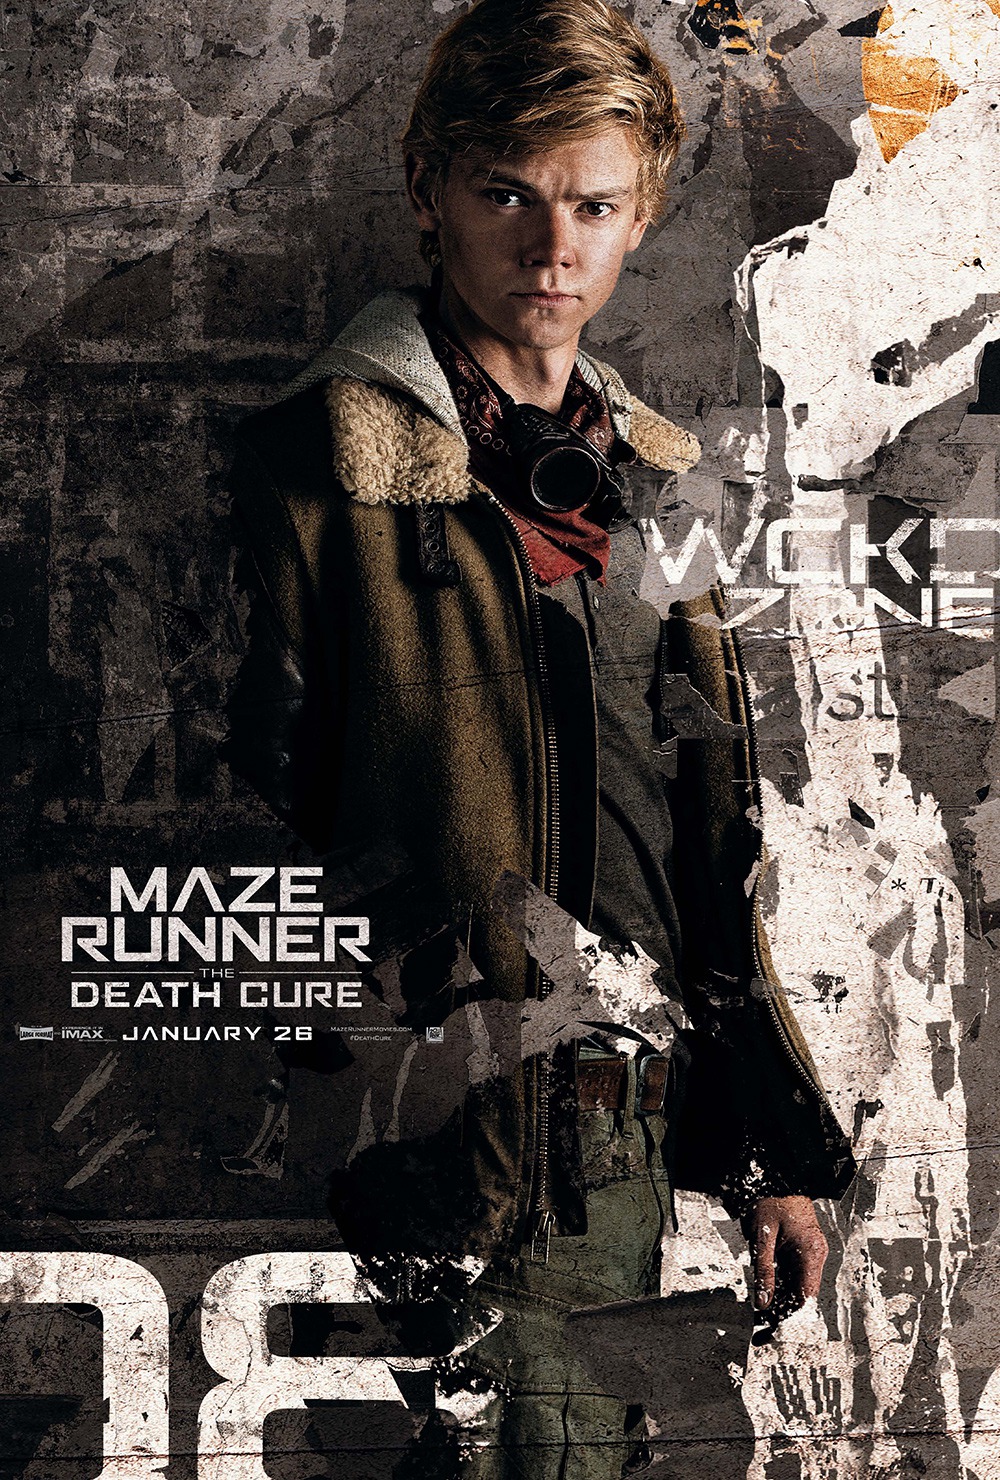 Maze Runner: The Death Cure Movie Poster (#3 of 20) - IMP Awards